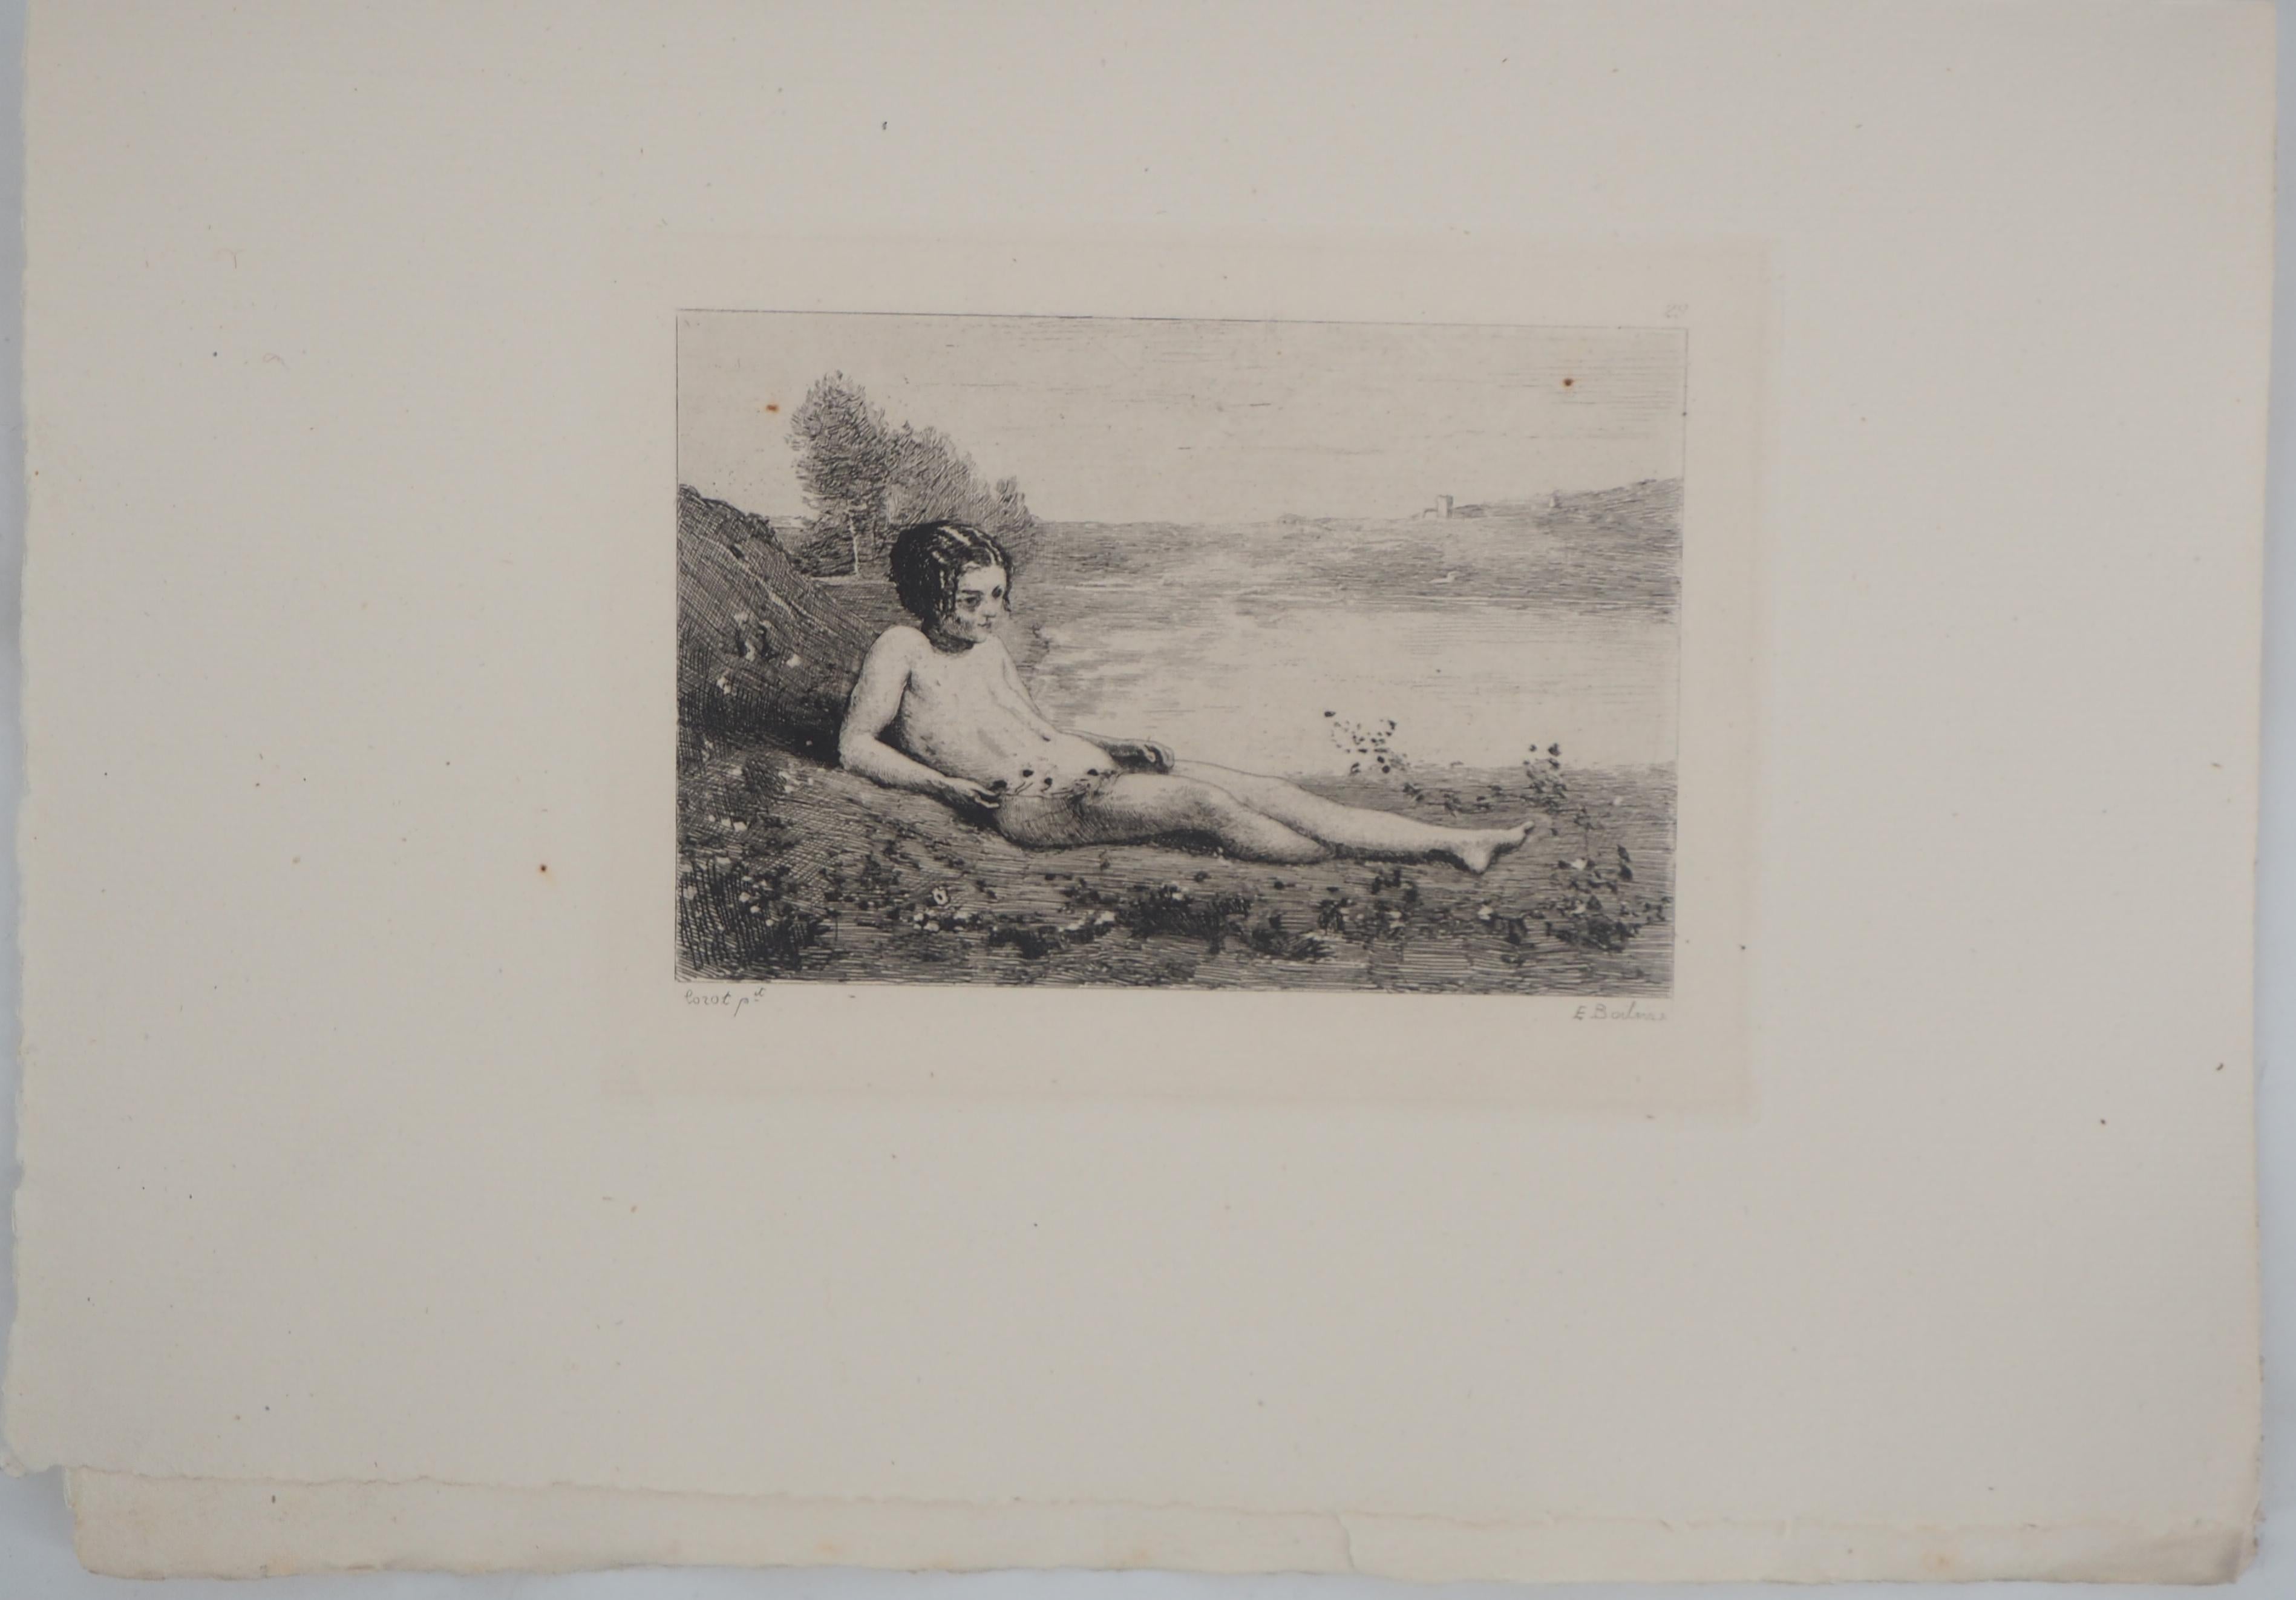 After the Bath - Original etching - Ed. Durand Ruel, 1873 - Impressionist Print by Jean-Baptiste-Camille Corot